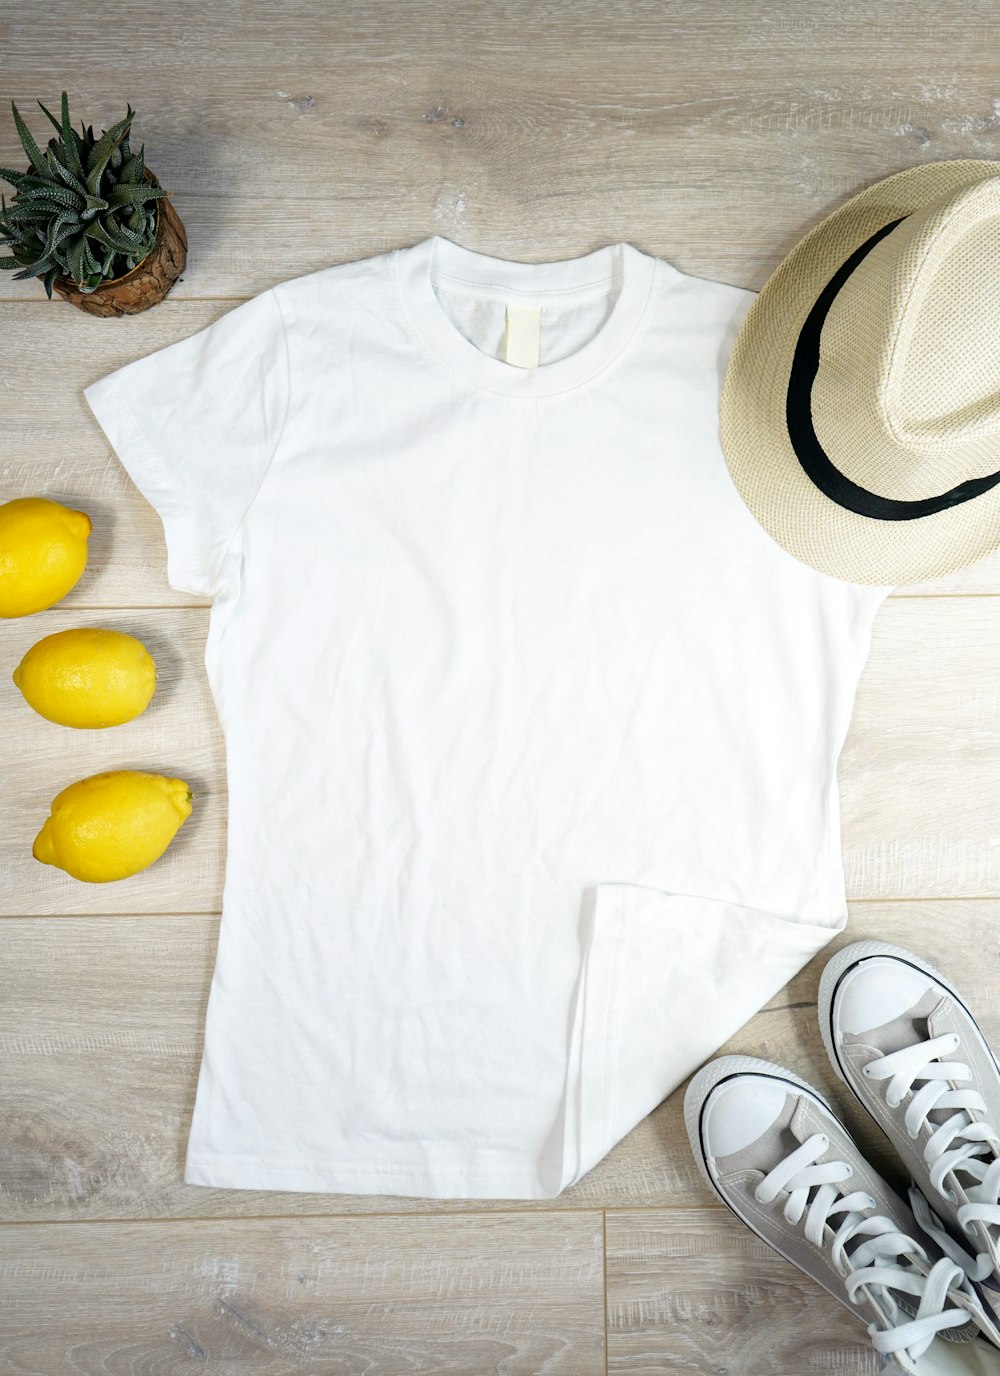 999+ White T Shirt Pictures | Download Free Images On Unsplash